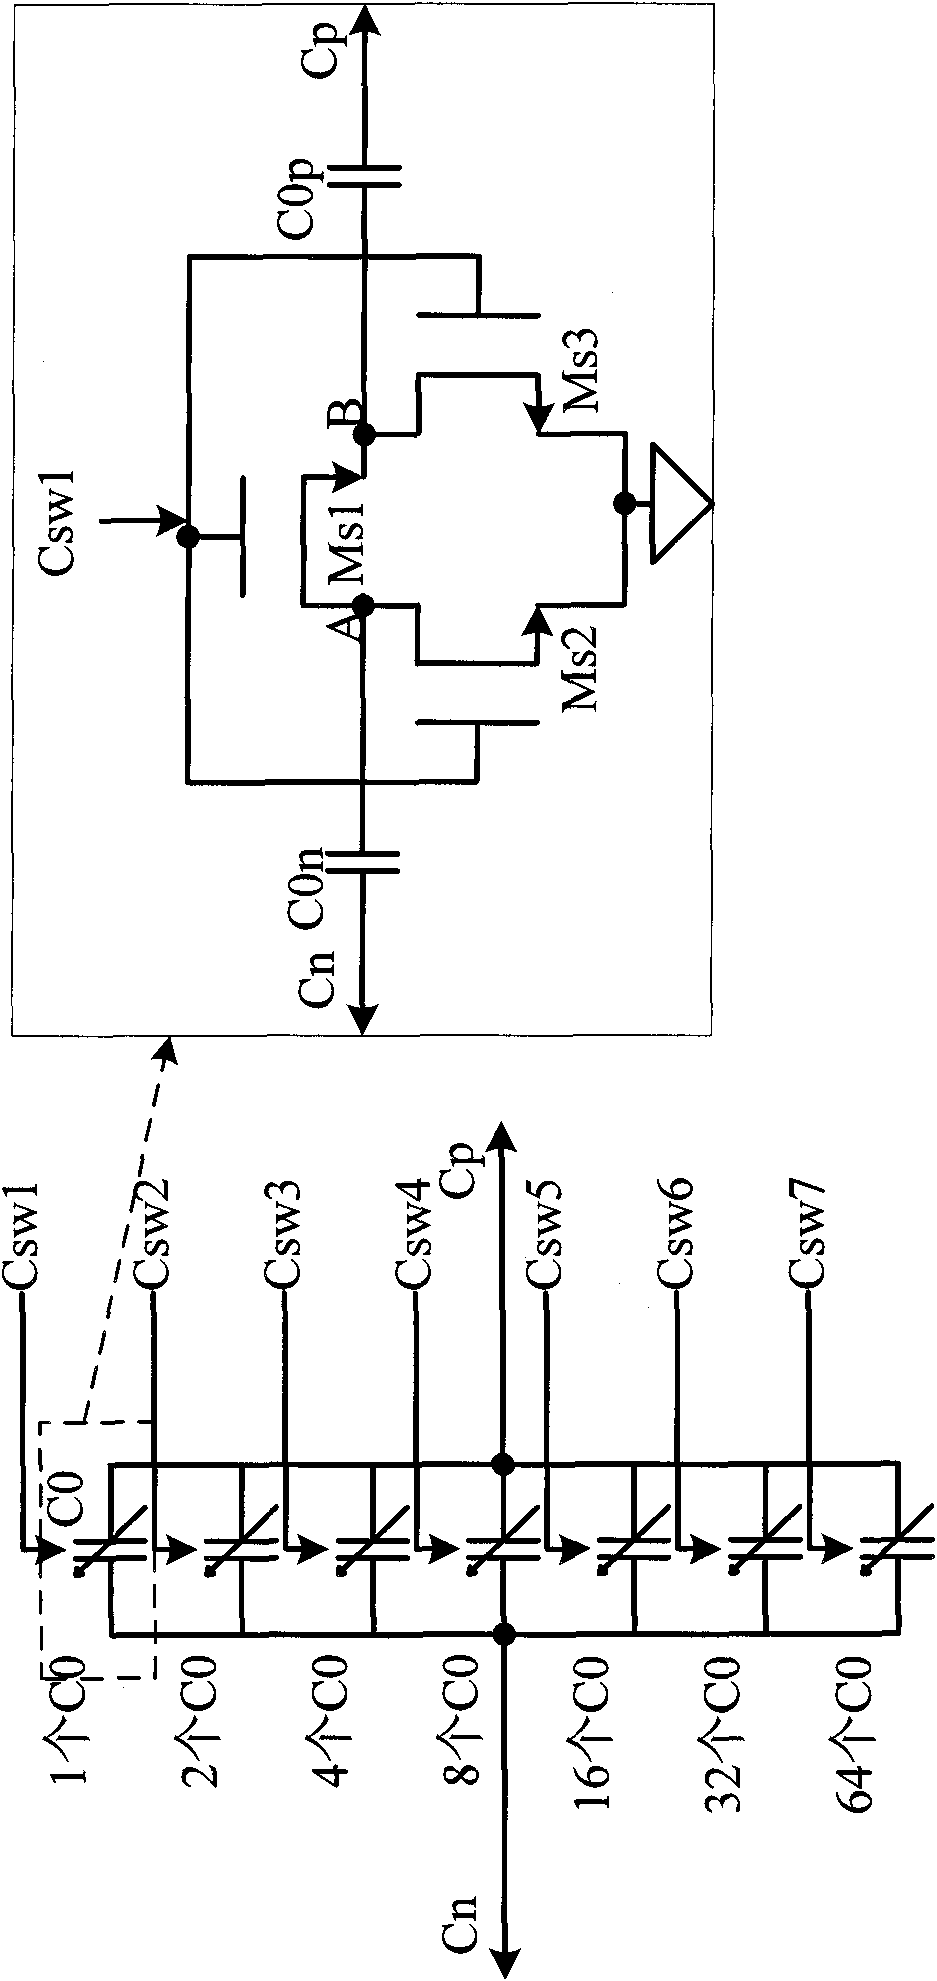 Frequency self-correction phase lock loop adopting bonding wire as electric inductance of oscillator